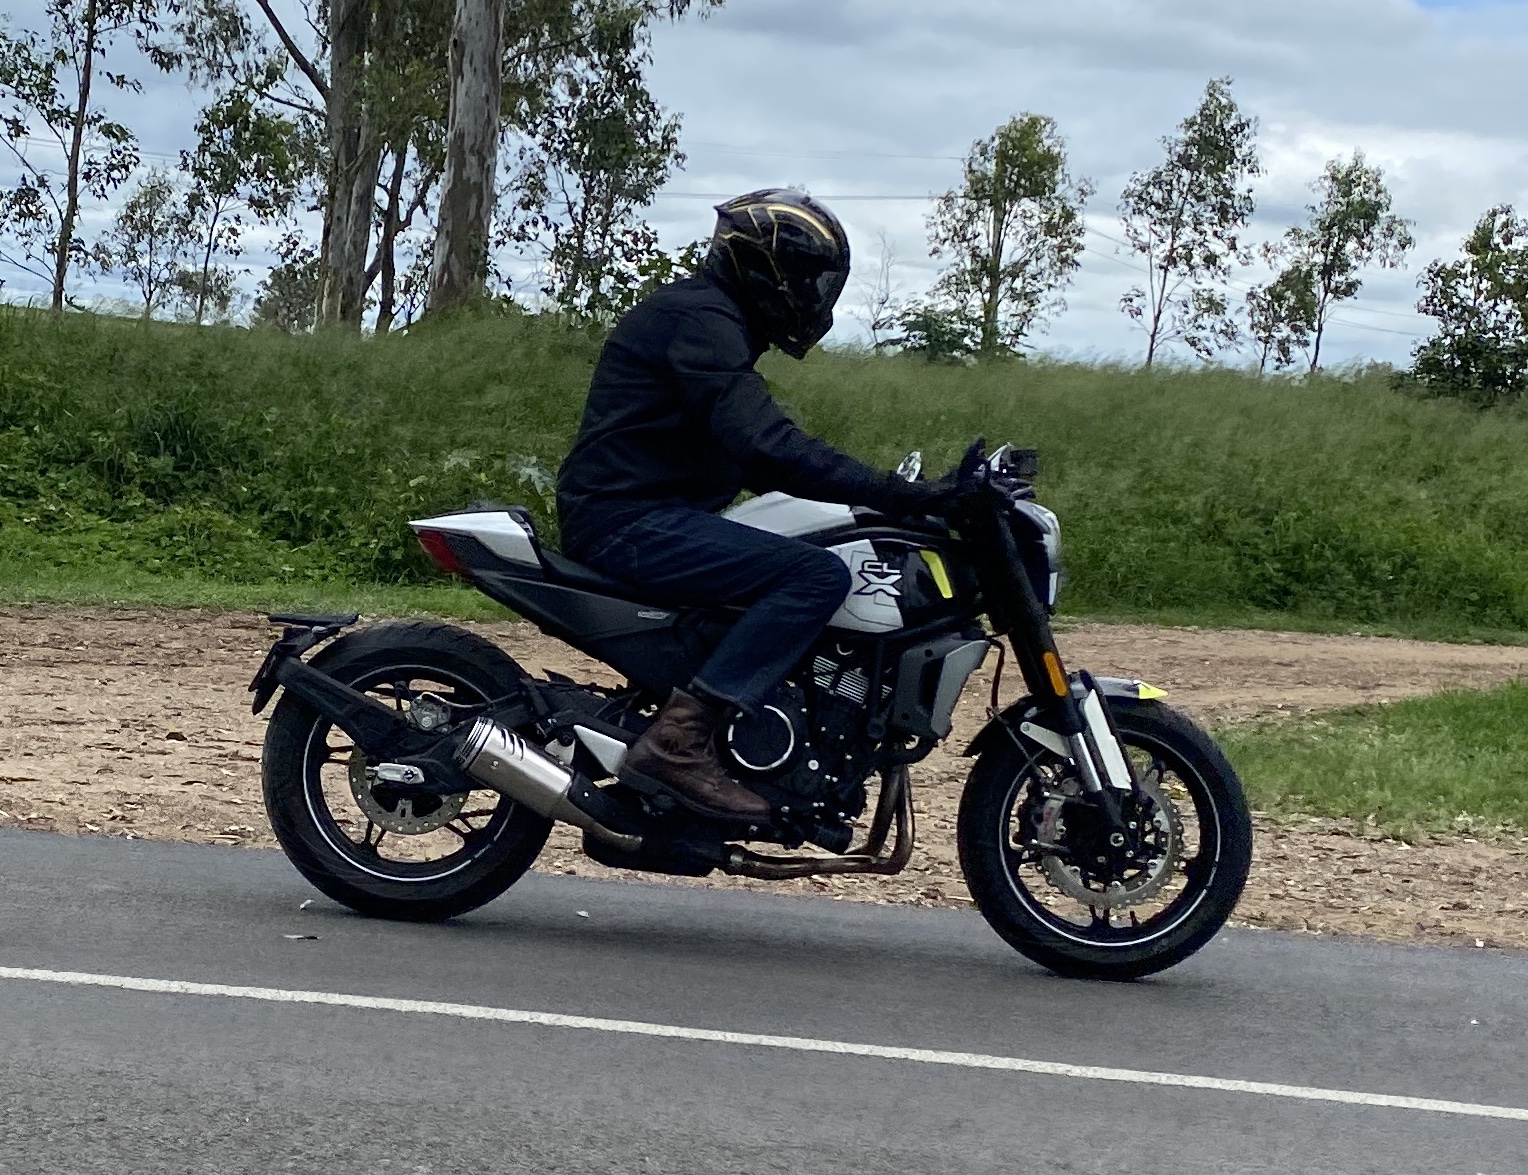 CFMOTO 700CL-X Sport on the road.